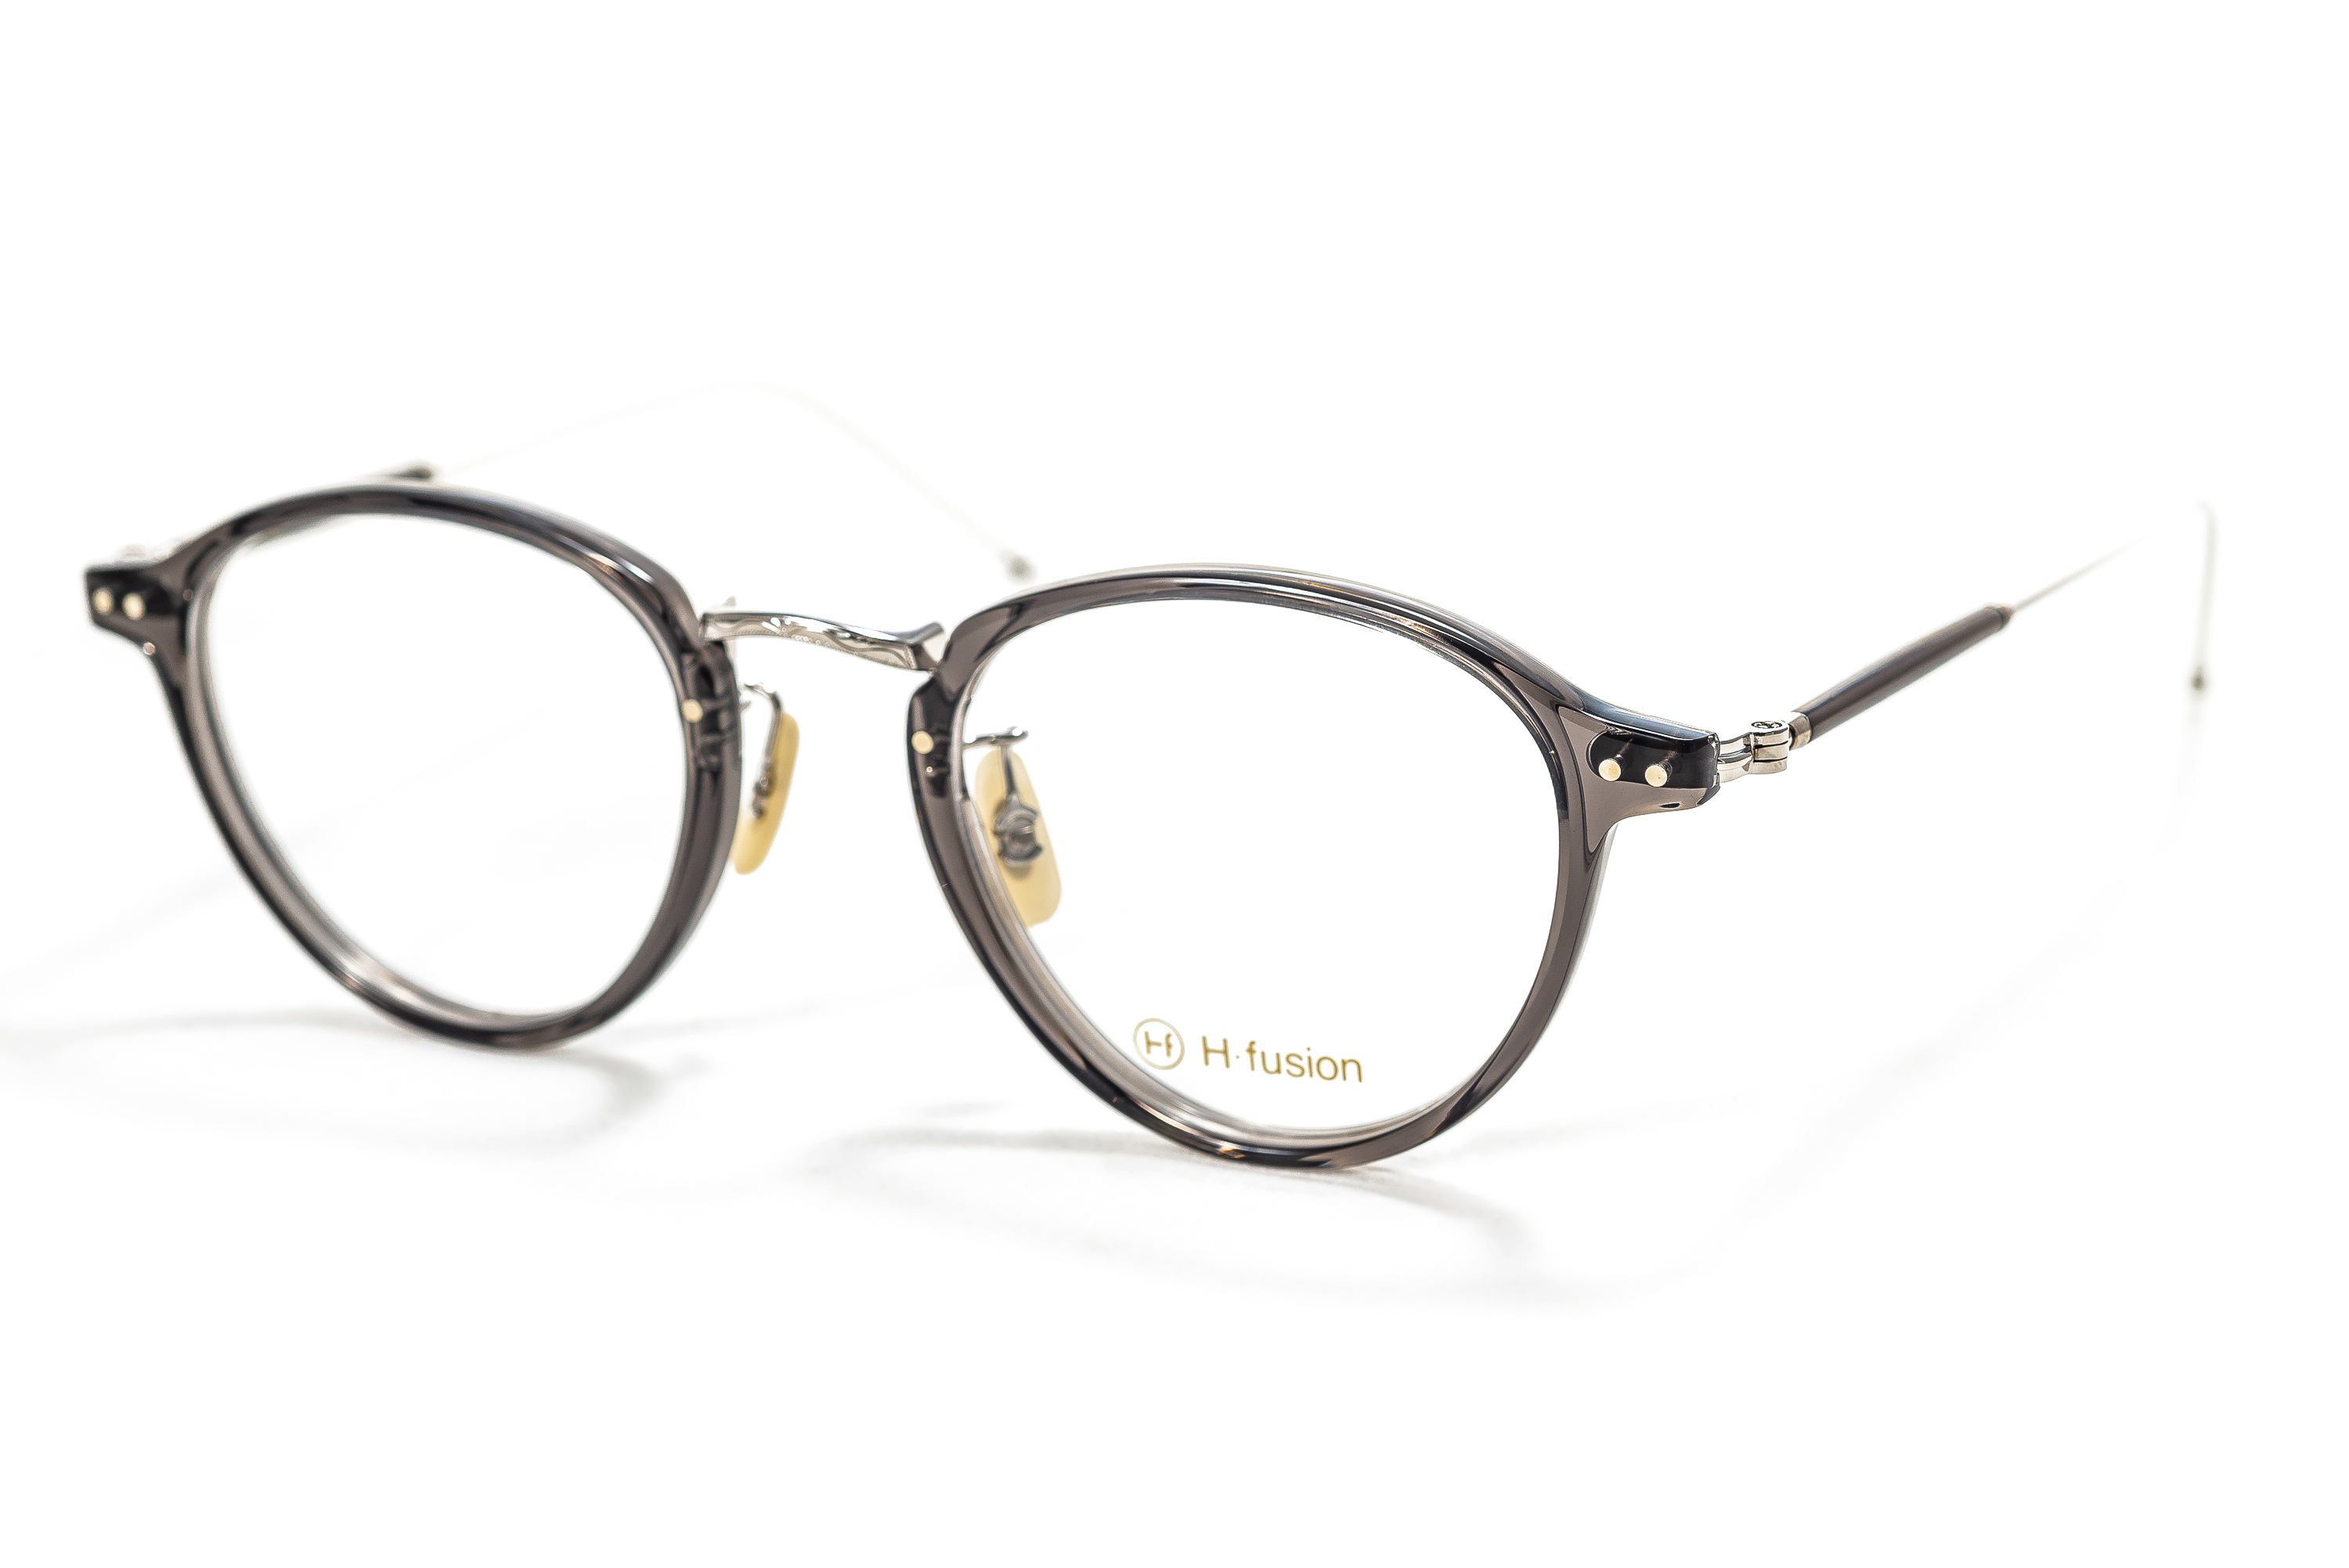 H-fusion - HF-136-COL-02- The New Black Optical